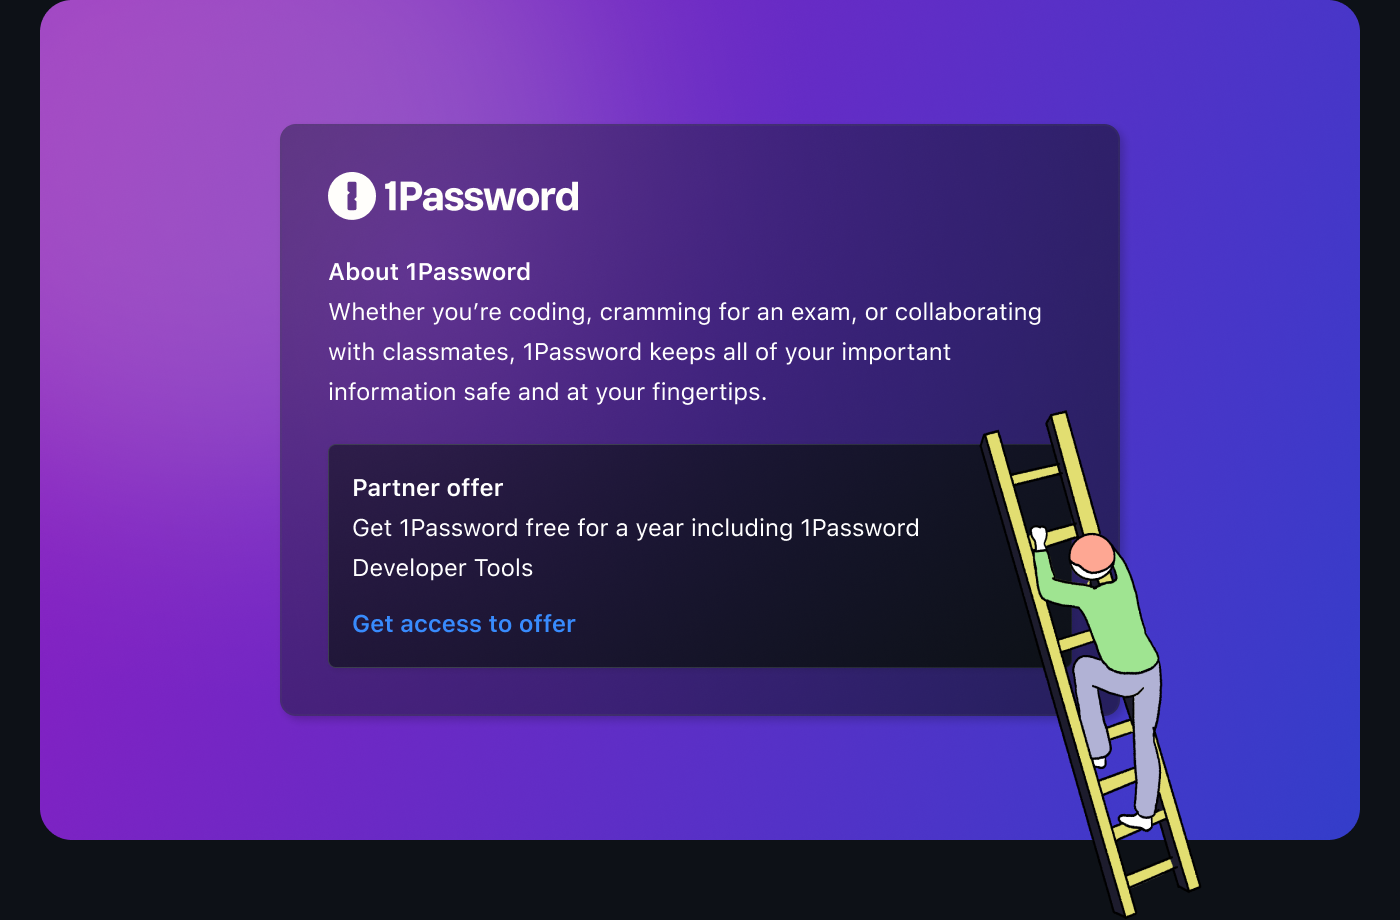 A cartoon person climbing up a ladder towards a popup with text about 1Password